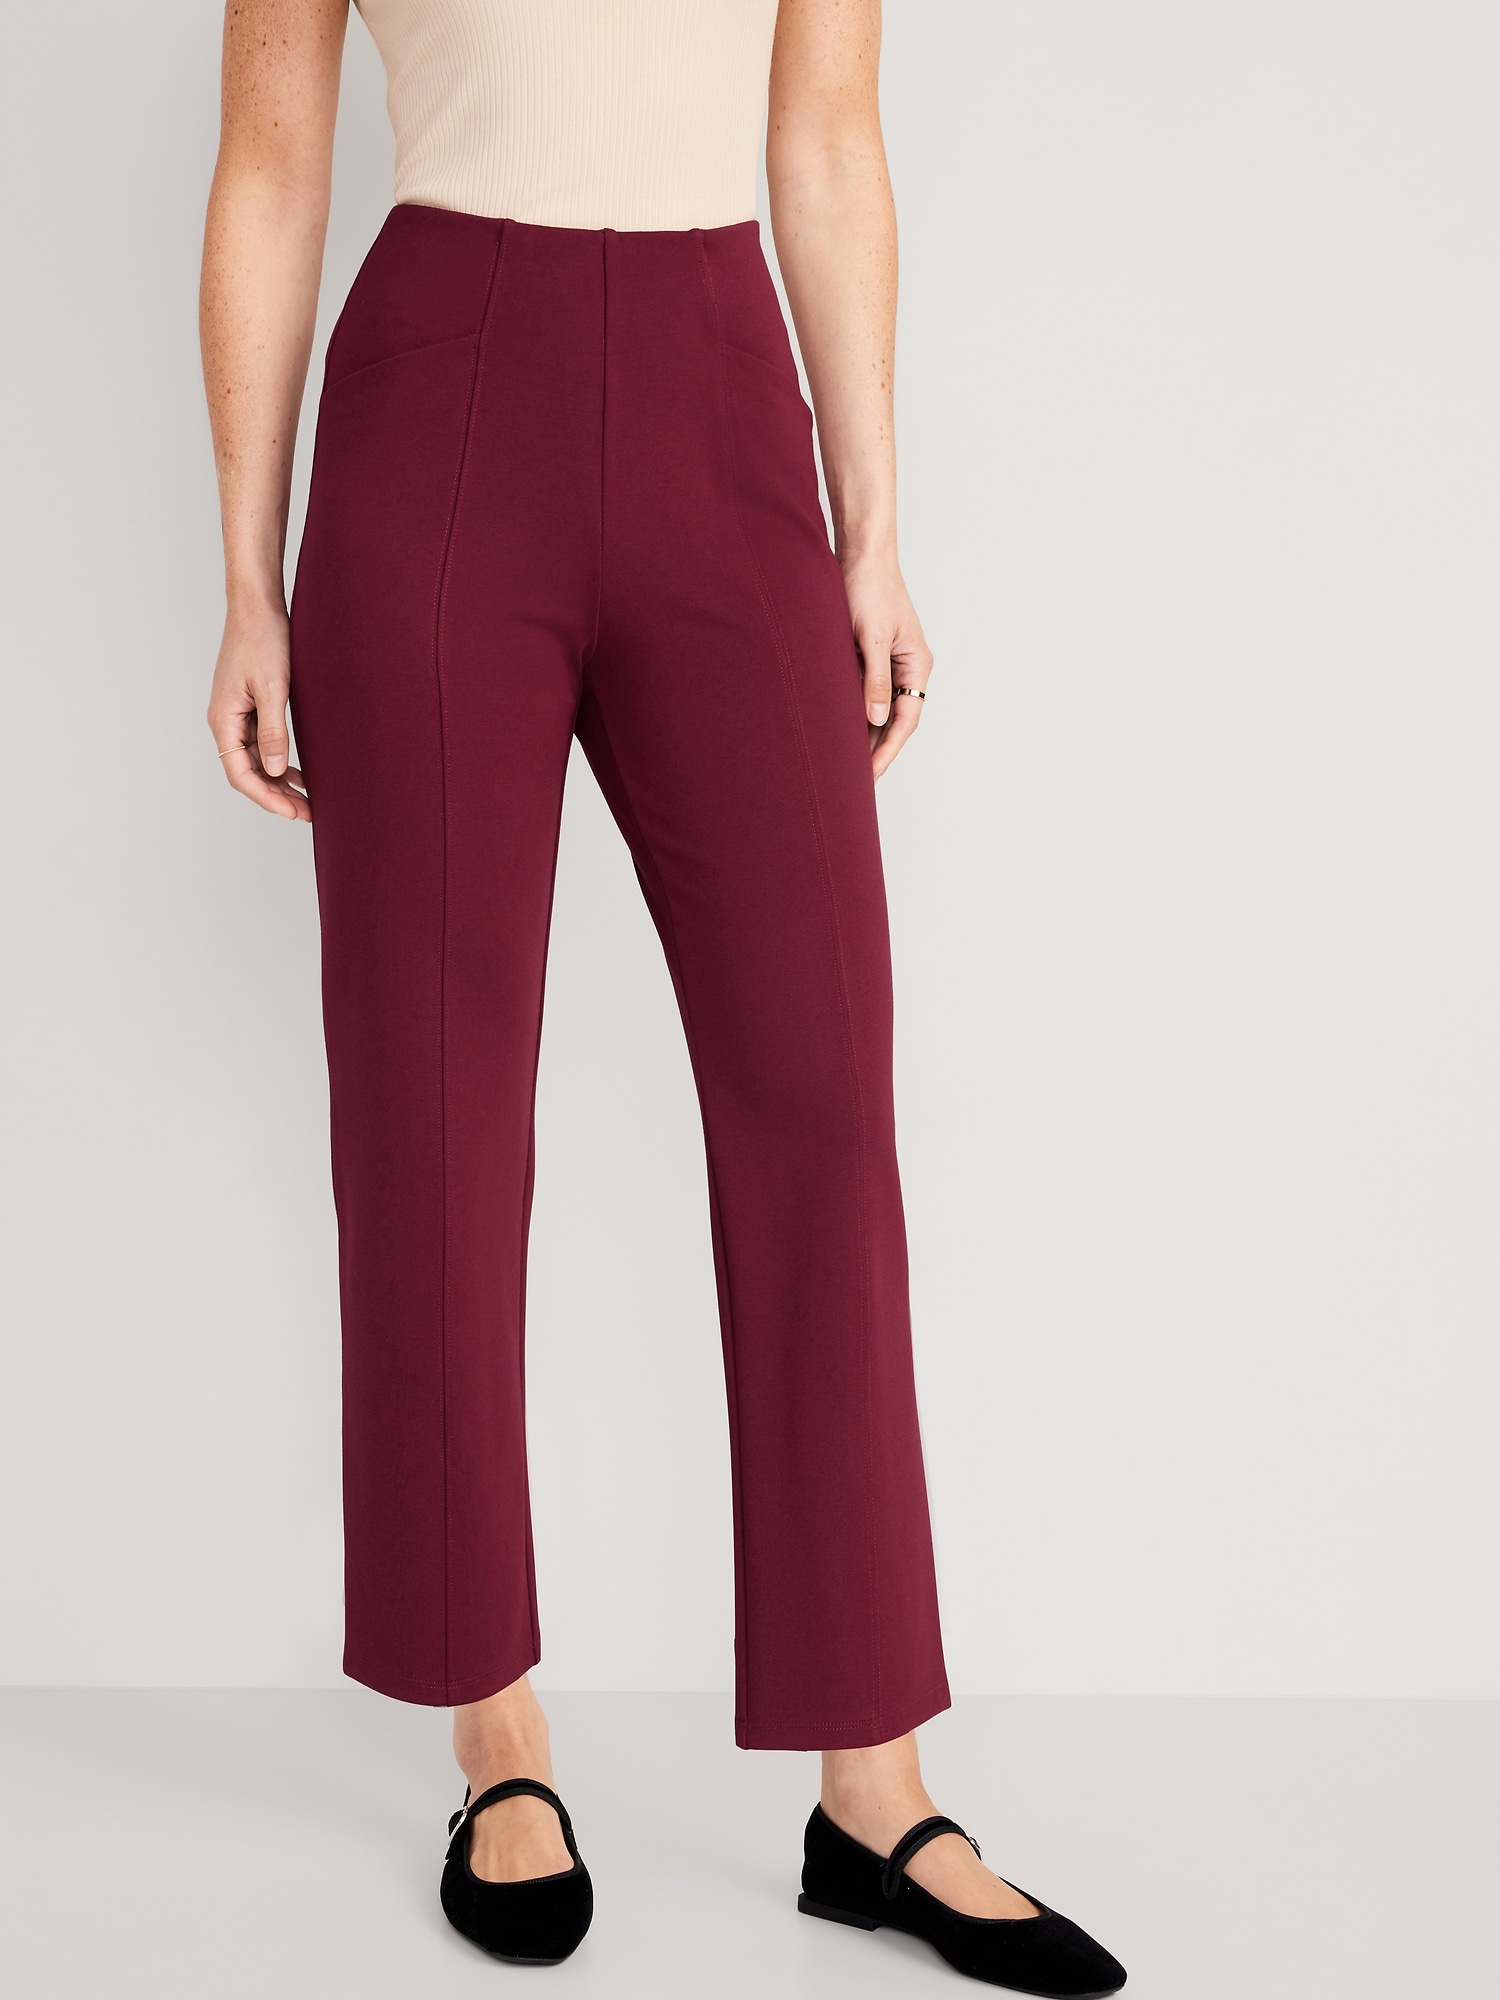 Women's Straight Leg Pants With Pockets